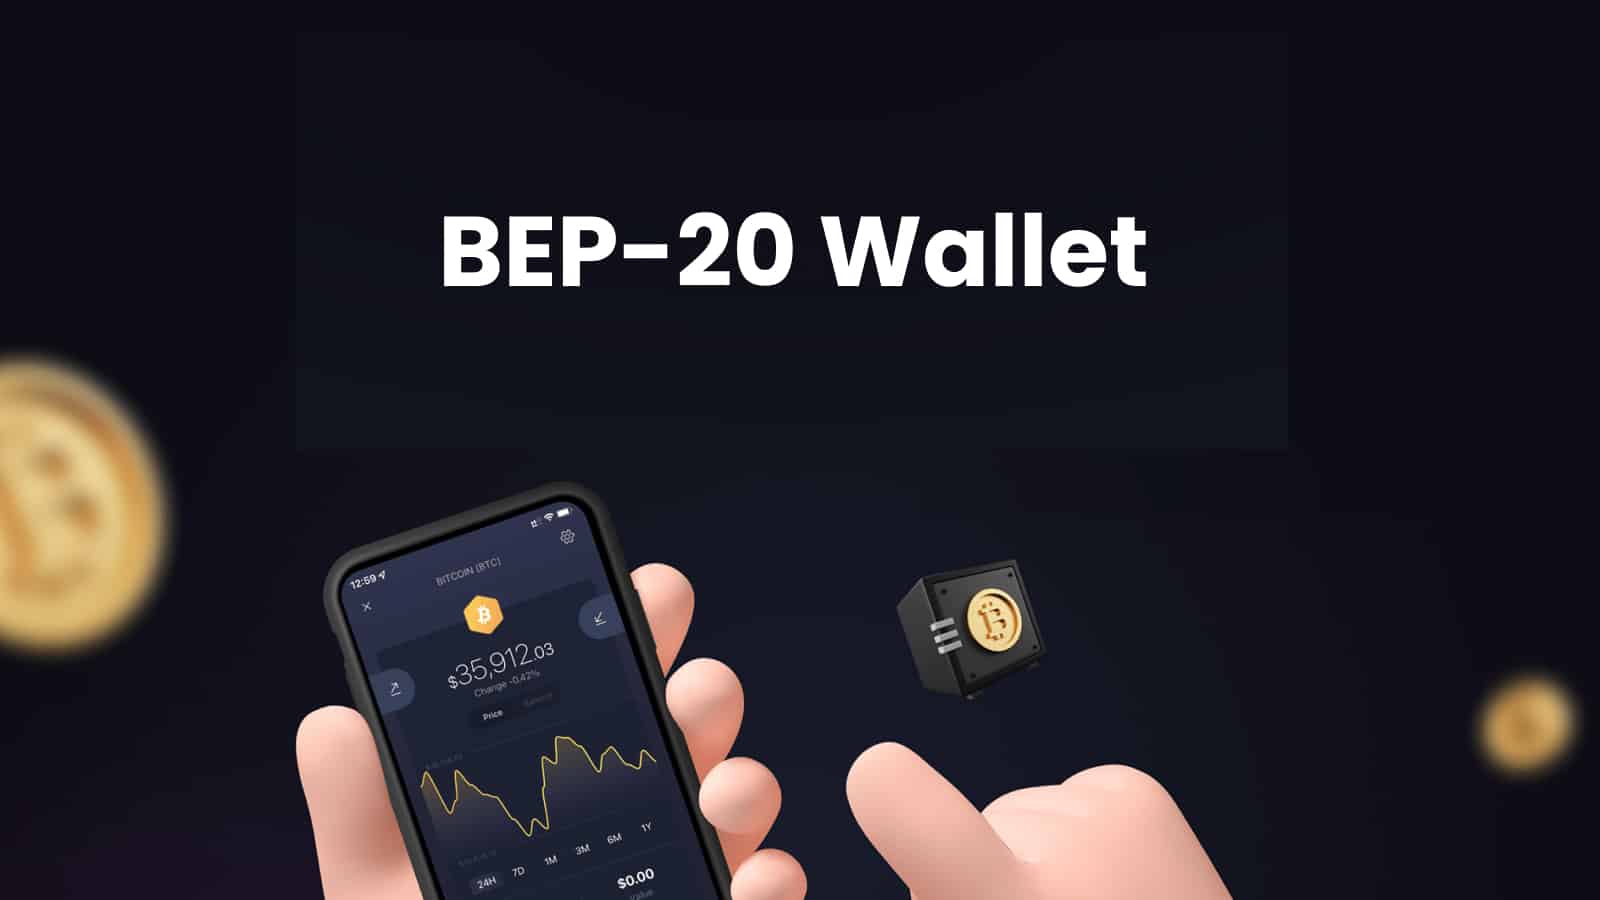 Bep 20 Wallet Featured Image